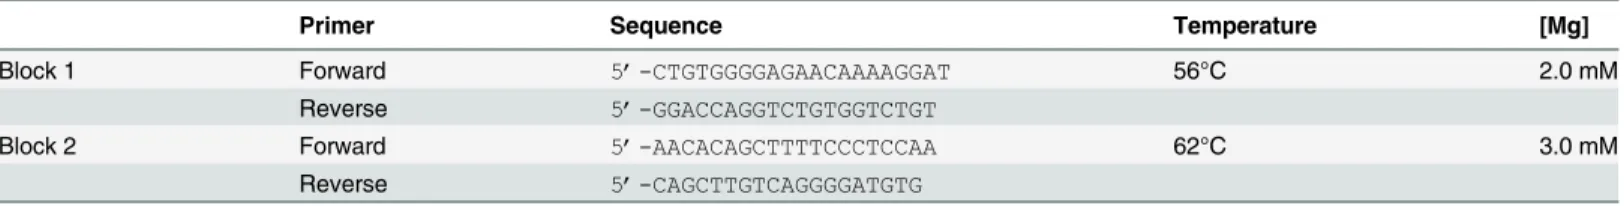 Table 1. Primer sequences and conditions for the TNF-α promoter gene.